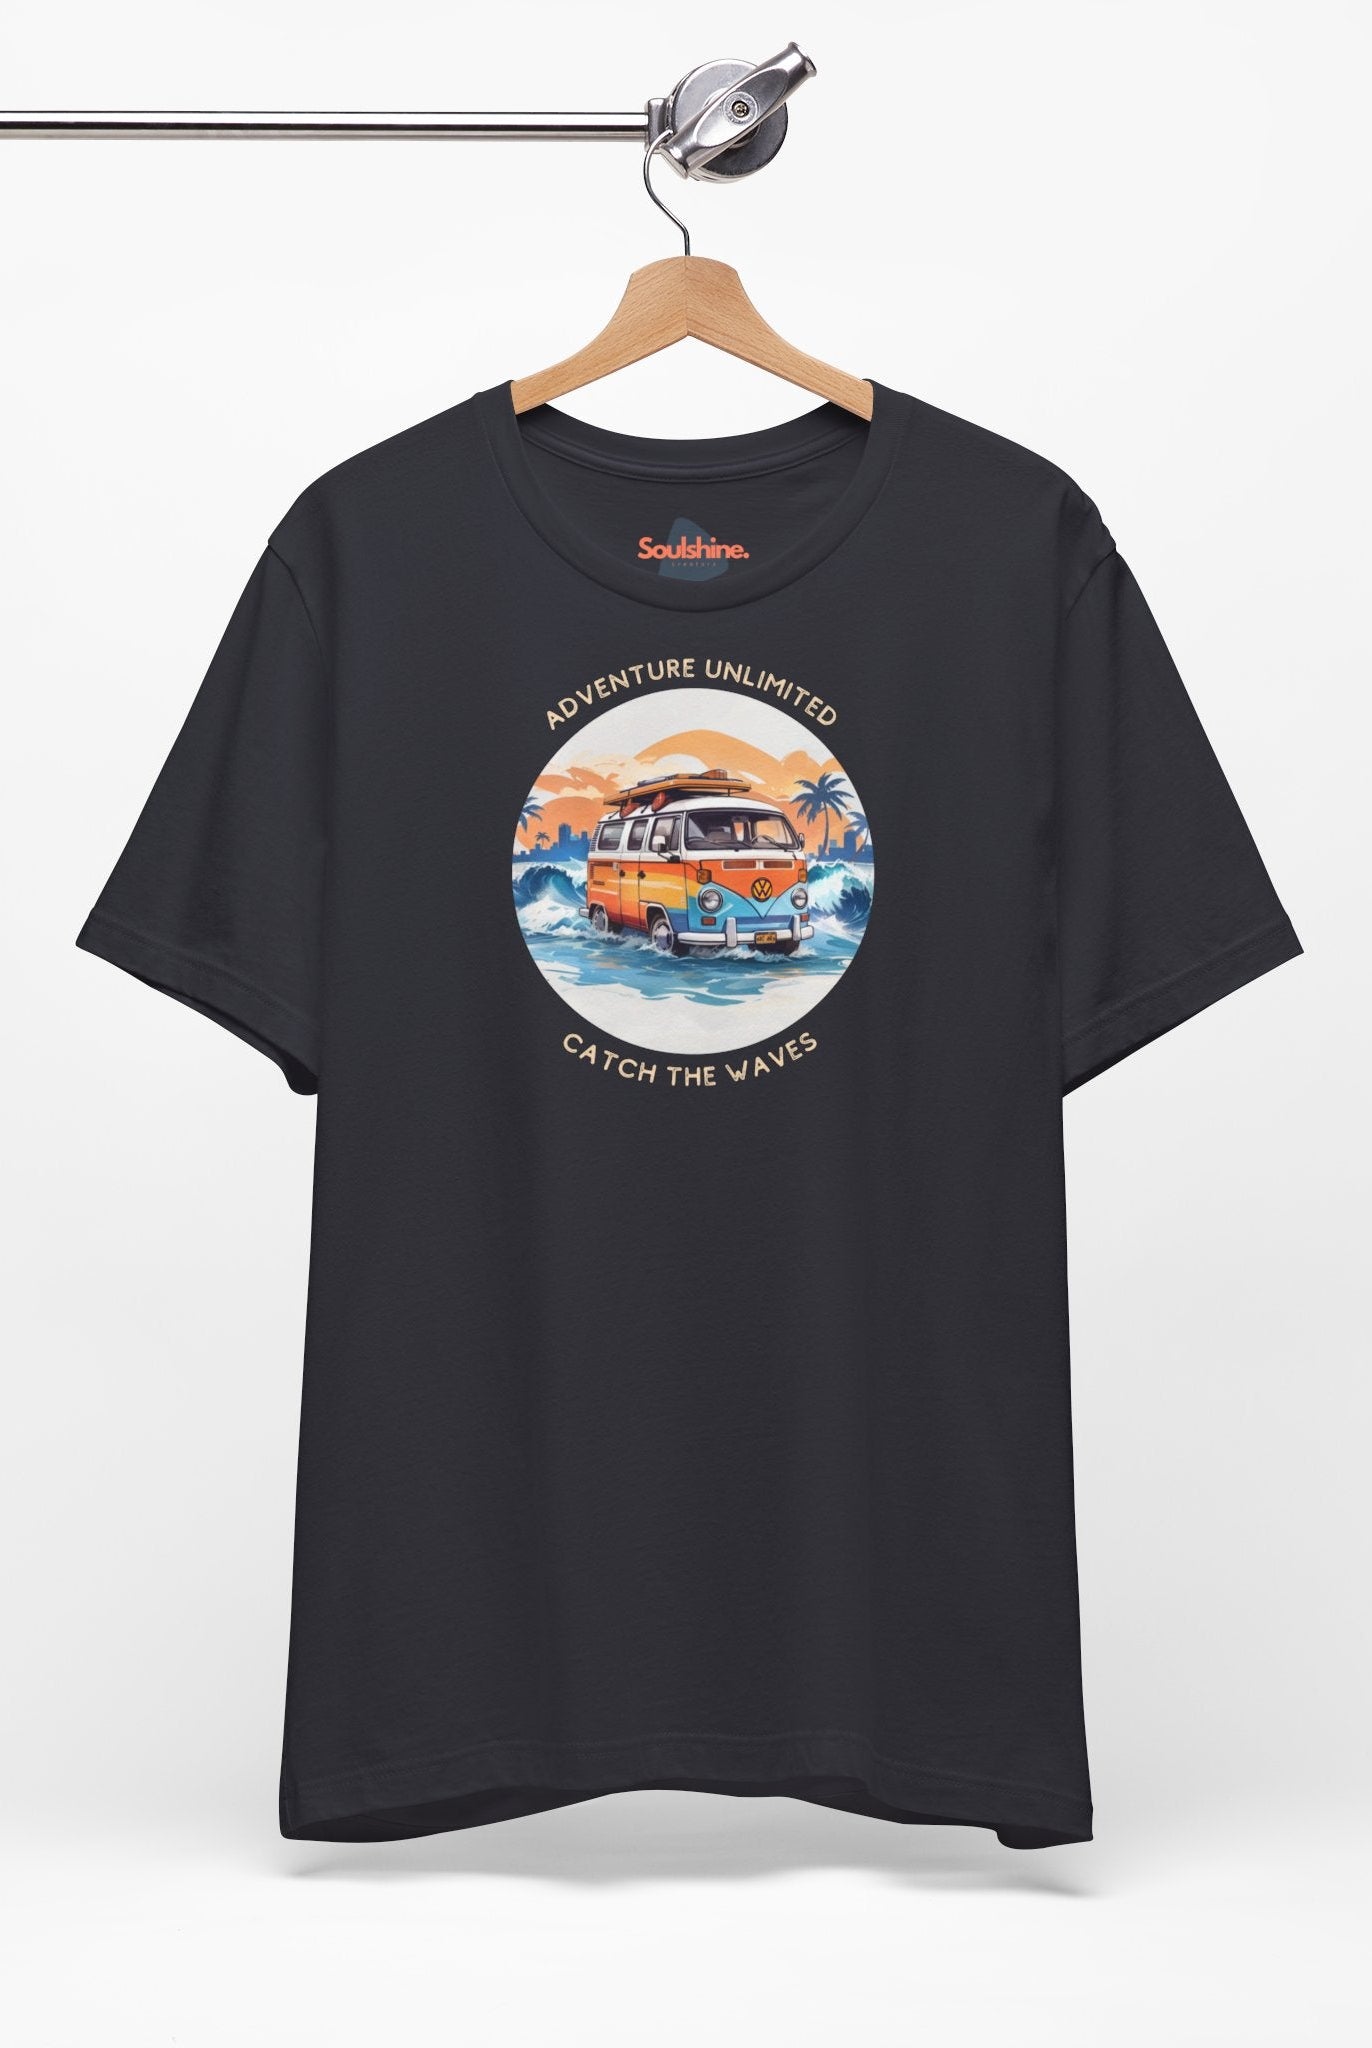 Adventure Unlimited black t-shirt with printed design - direct-to-garment item